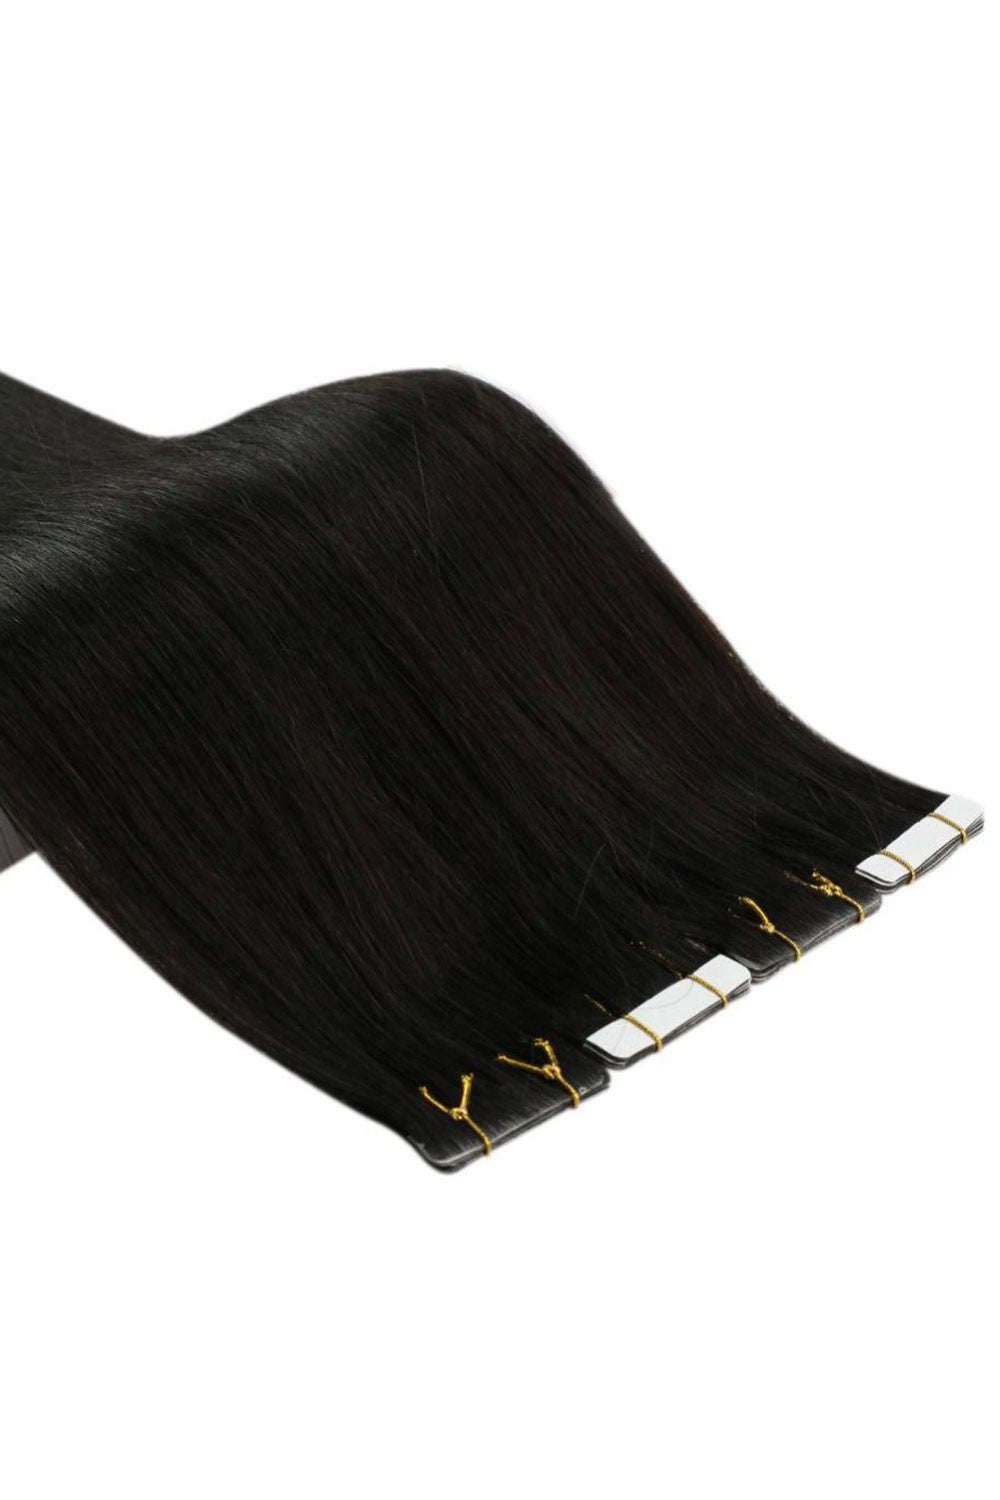 straight-tape-in-hair-extensions-for-black-hair-seamless-invisible-7